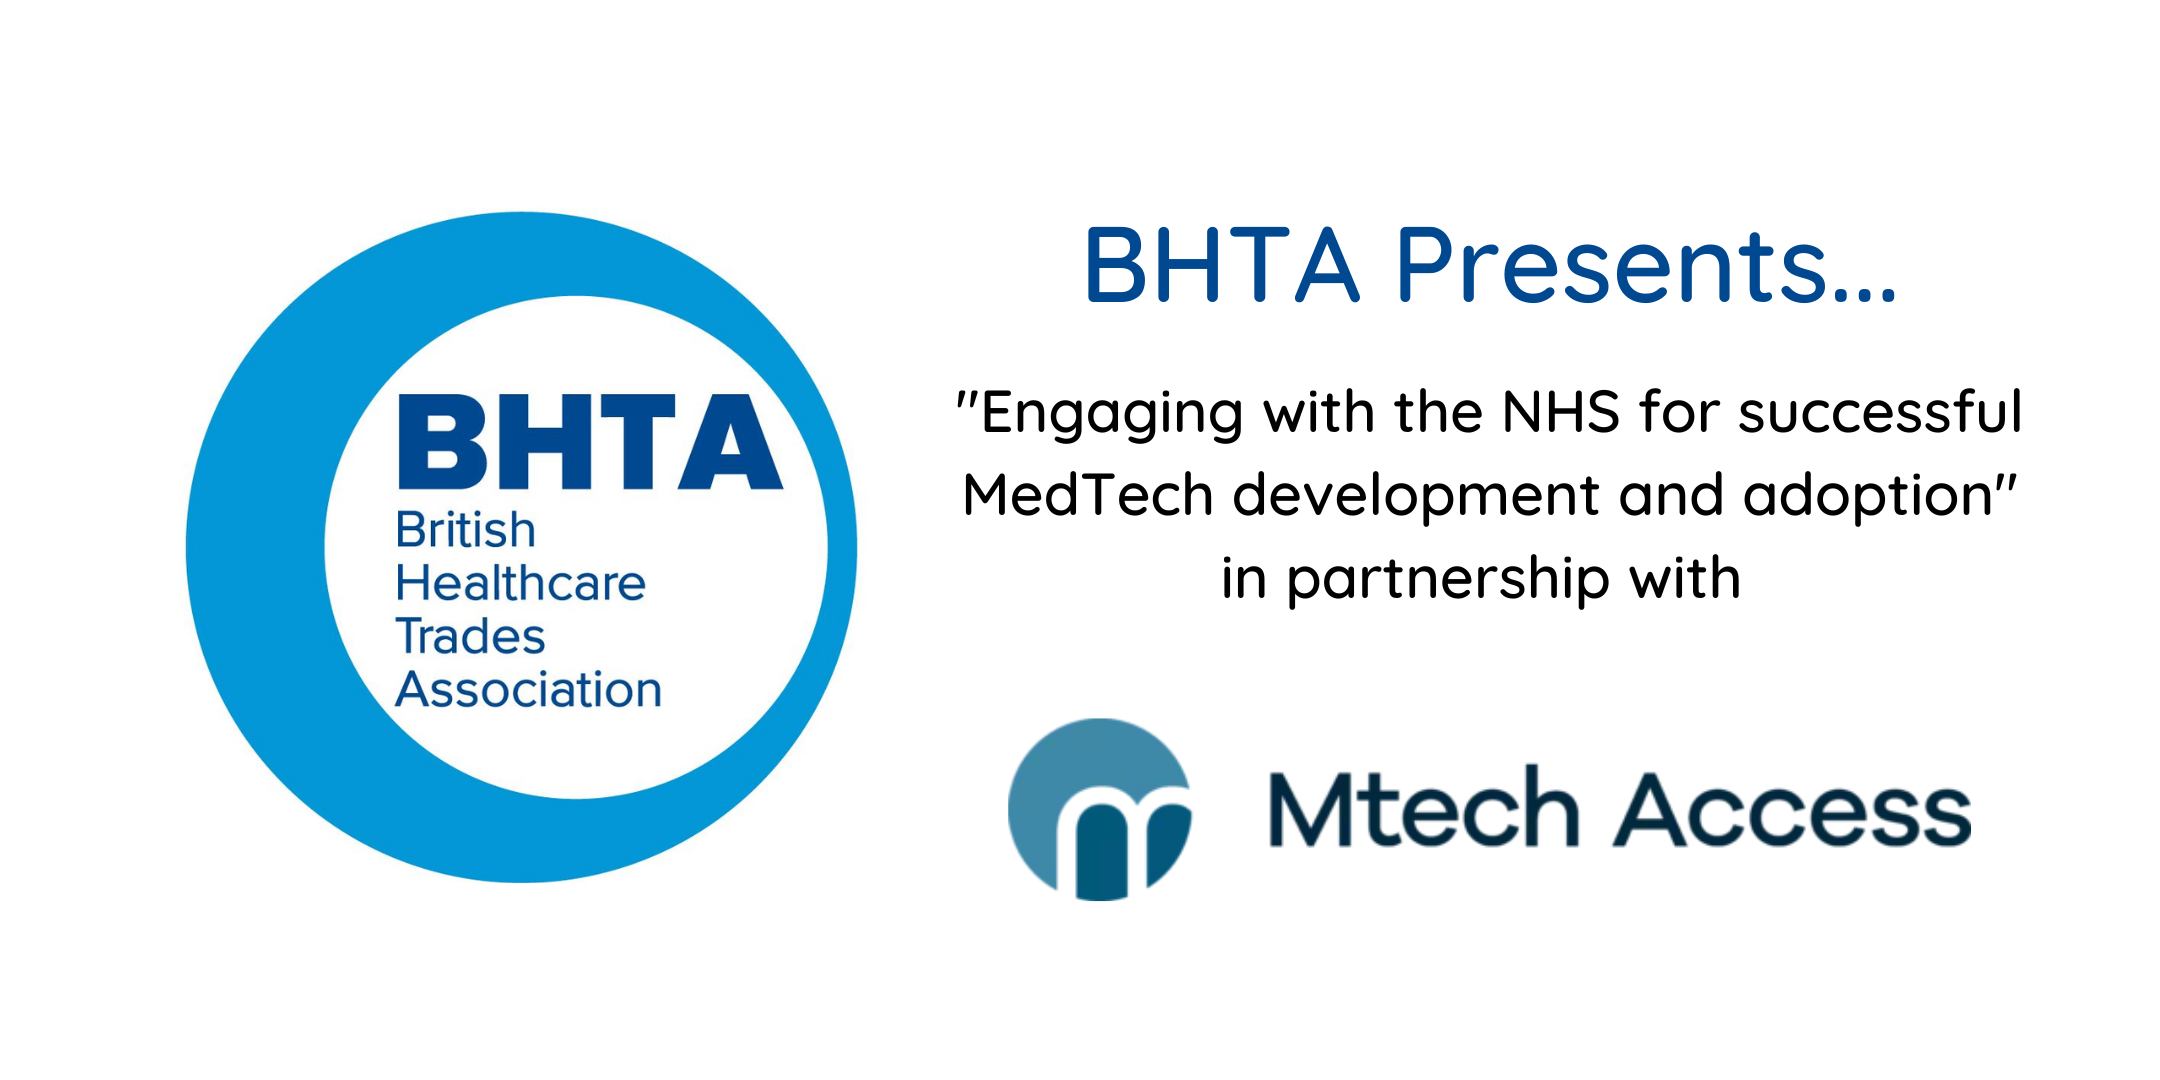 BHTA presents... "Engaging with the NHS for successful MedTech development and adoption"